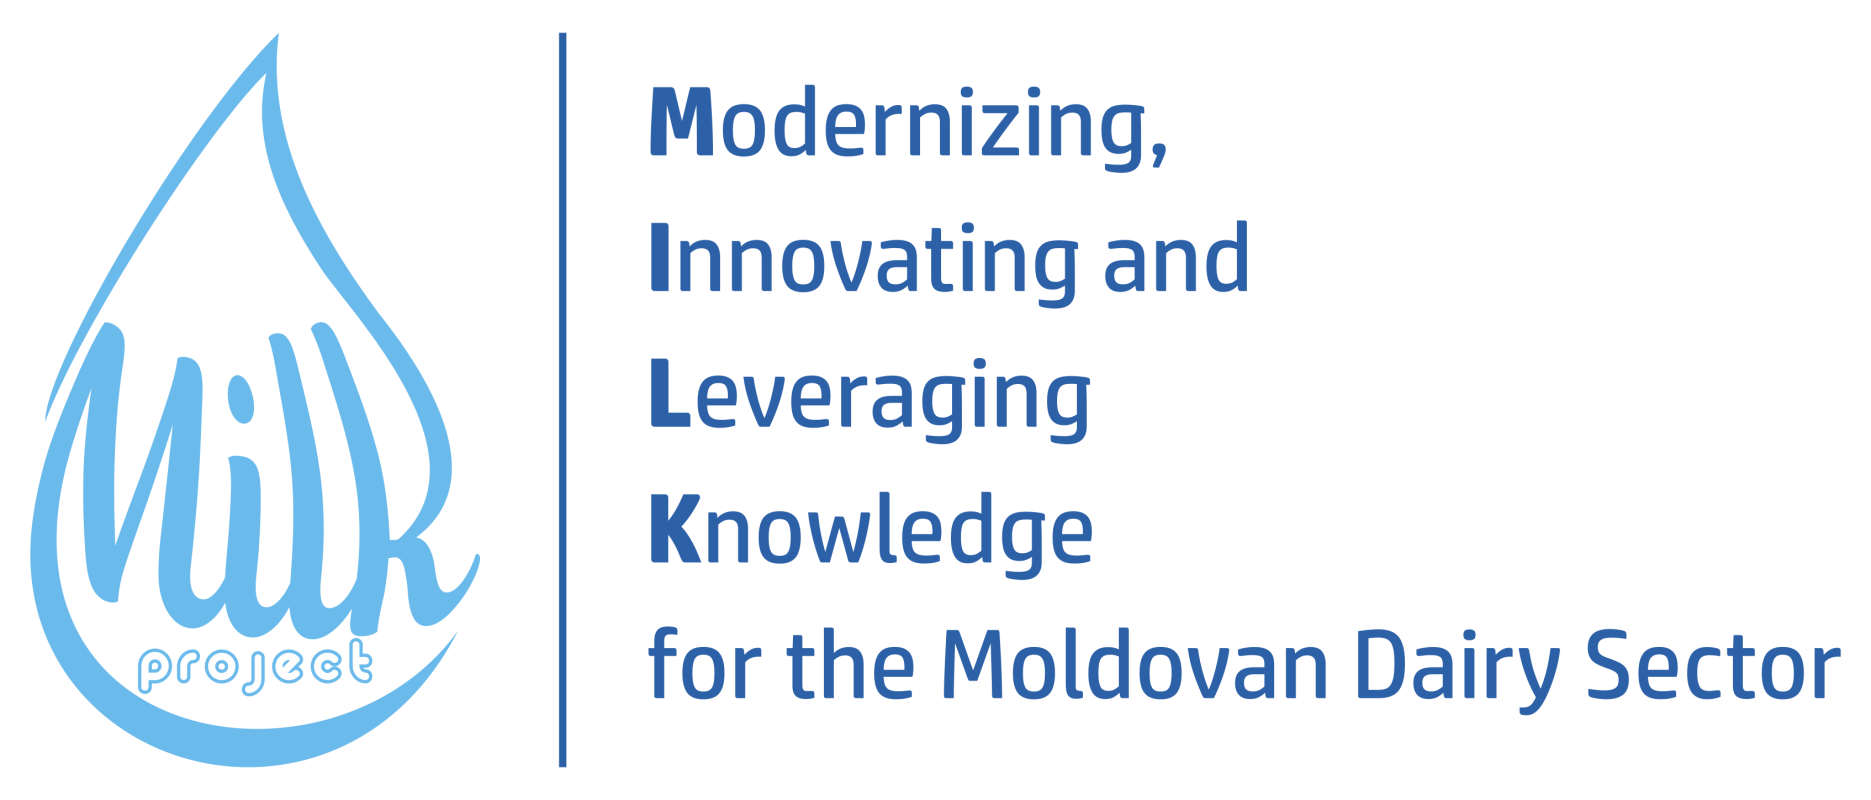 Modernizing, Innovating, and Leveraging Knowledge for the Moldovan Dairy Sector (MILK)